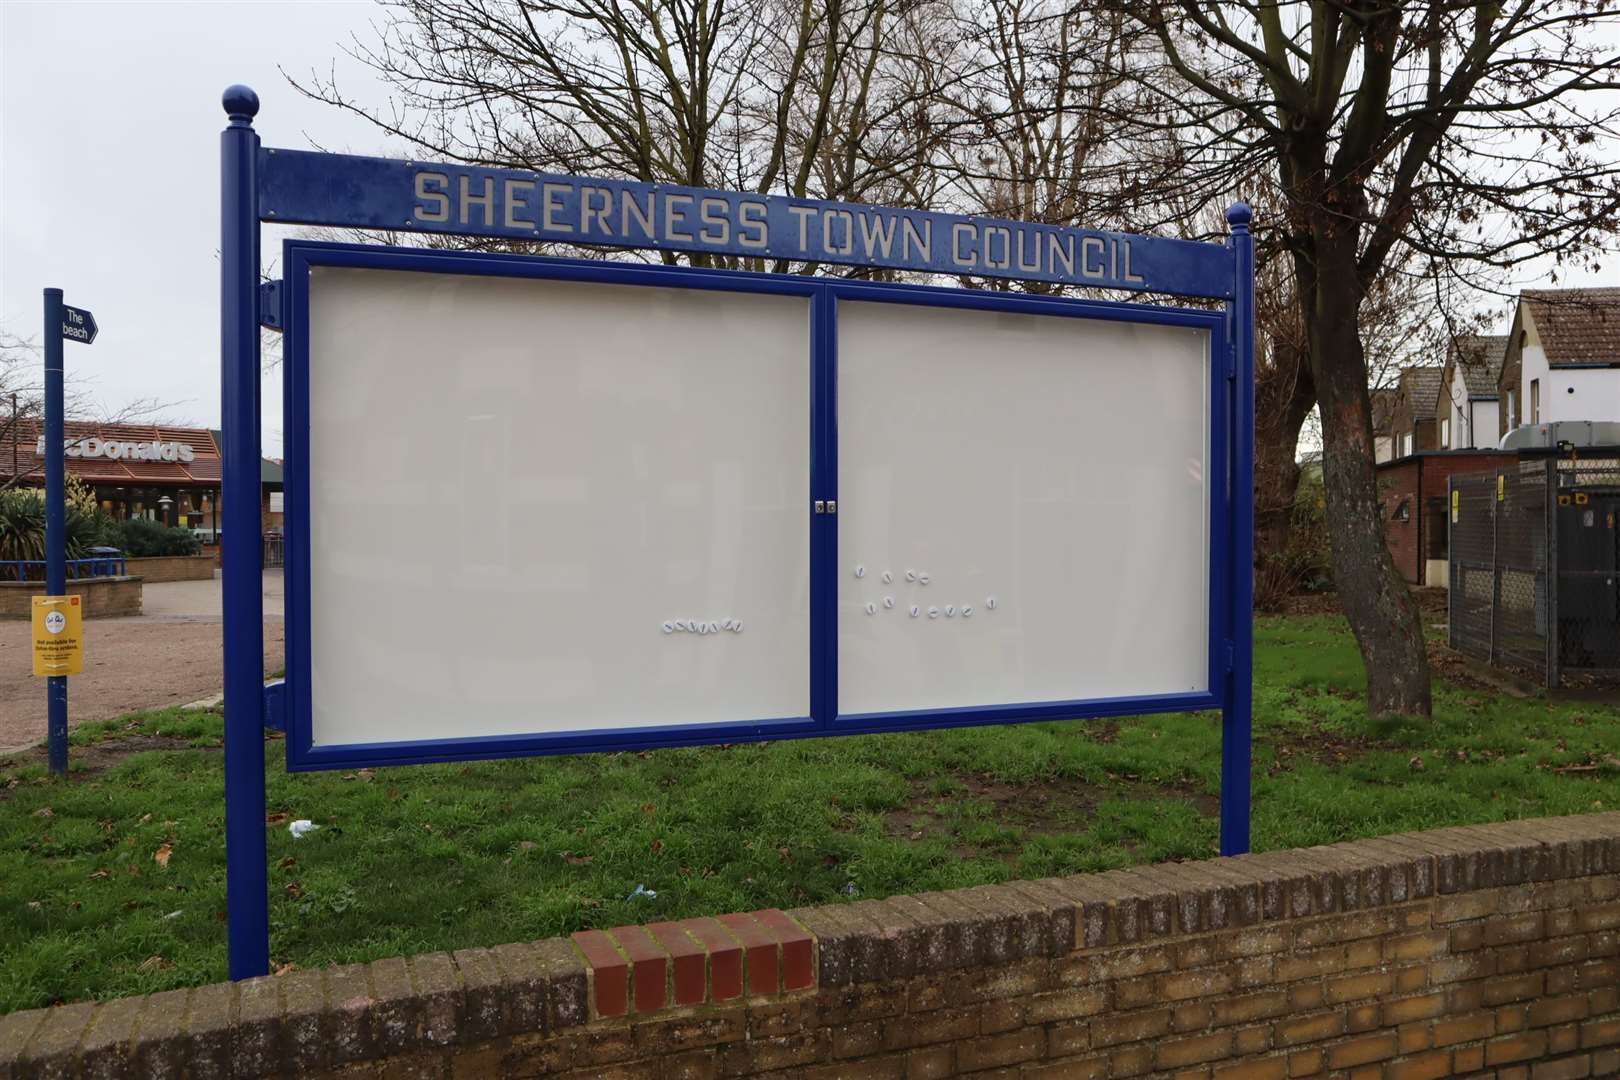 New information sign installed by Sheerness Town Council